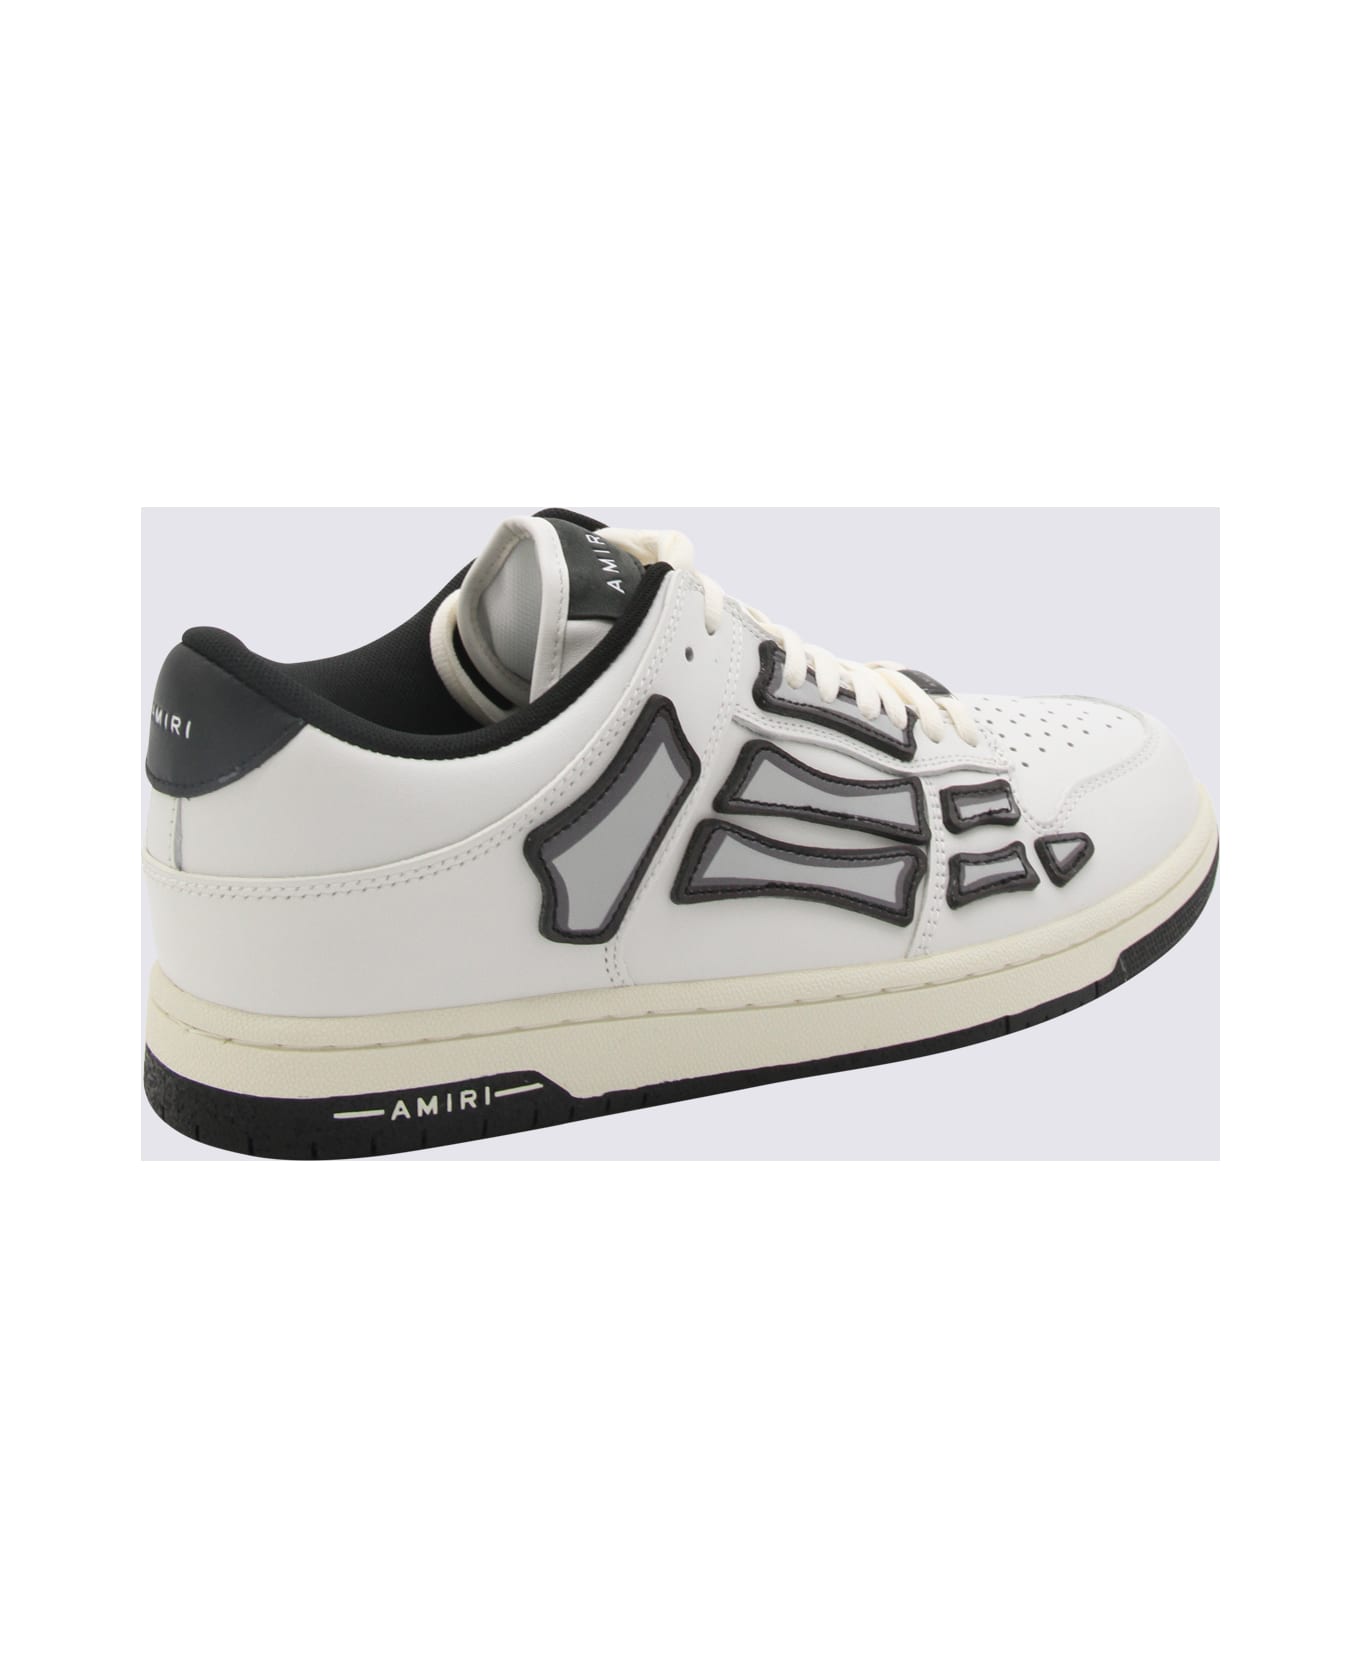 AMIRI White And Black Leather Skel Sneakers - White スニーカー